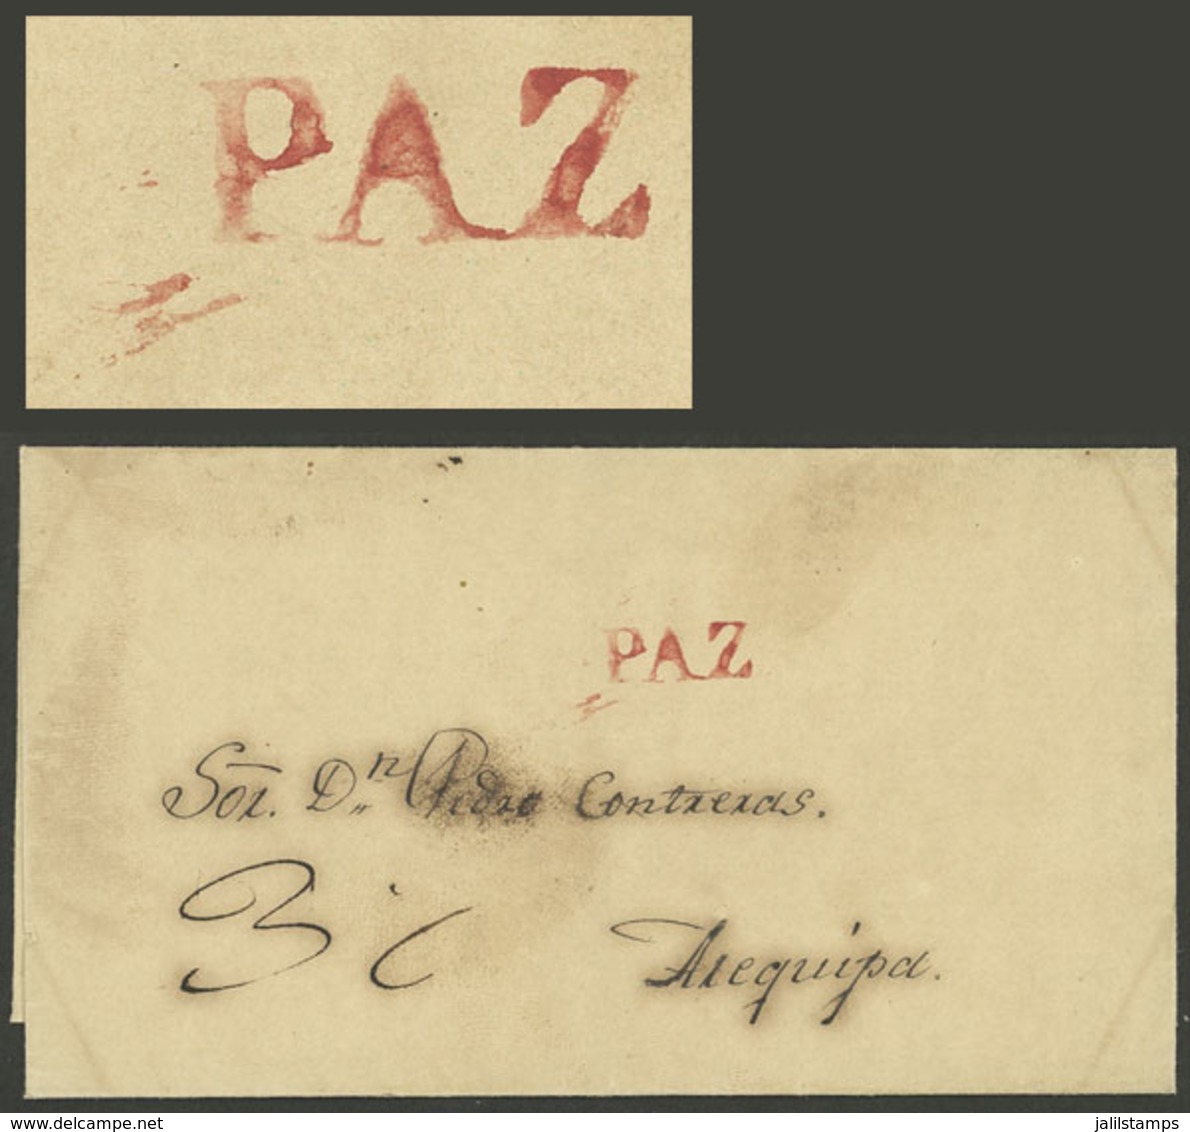 BOLIVIA: Folded Cover Sent To Arequipa, With "3" Rating In Pen And PAZ Mark (16.5 X 7 Mm) Perfectly Applied, In Red, Exc - Bolivia